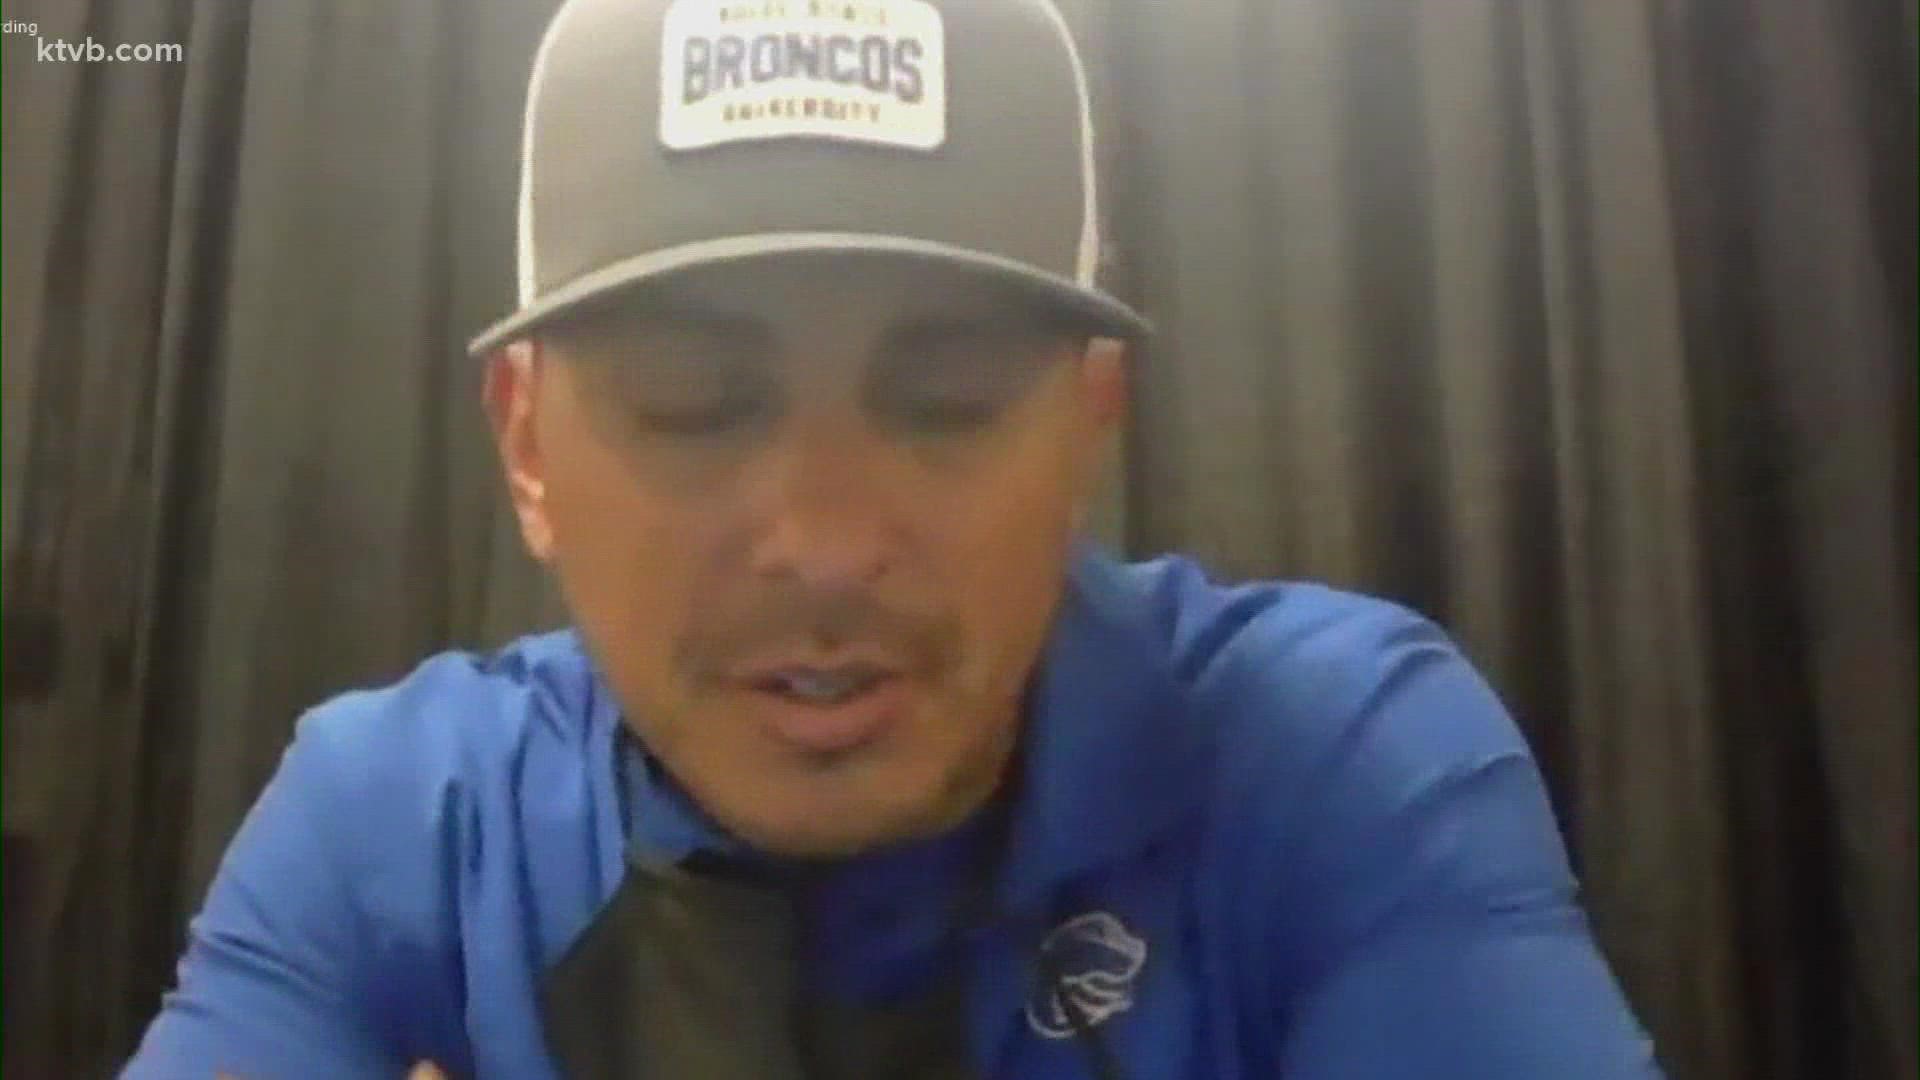 First-year head coach Andy Avalos reacts to losing the Broncos' season opener against UCF on Thursday night.